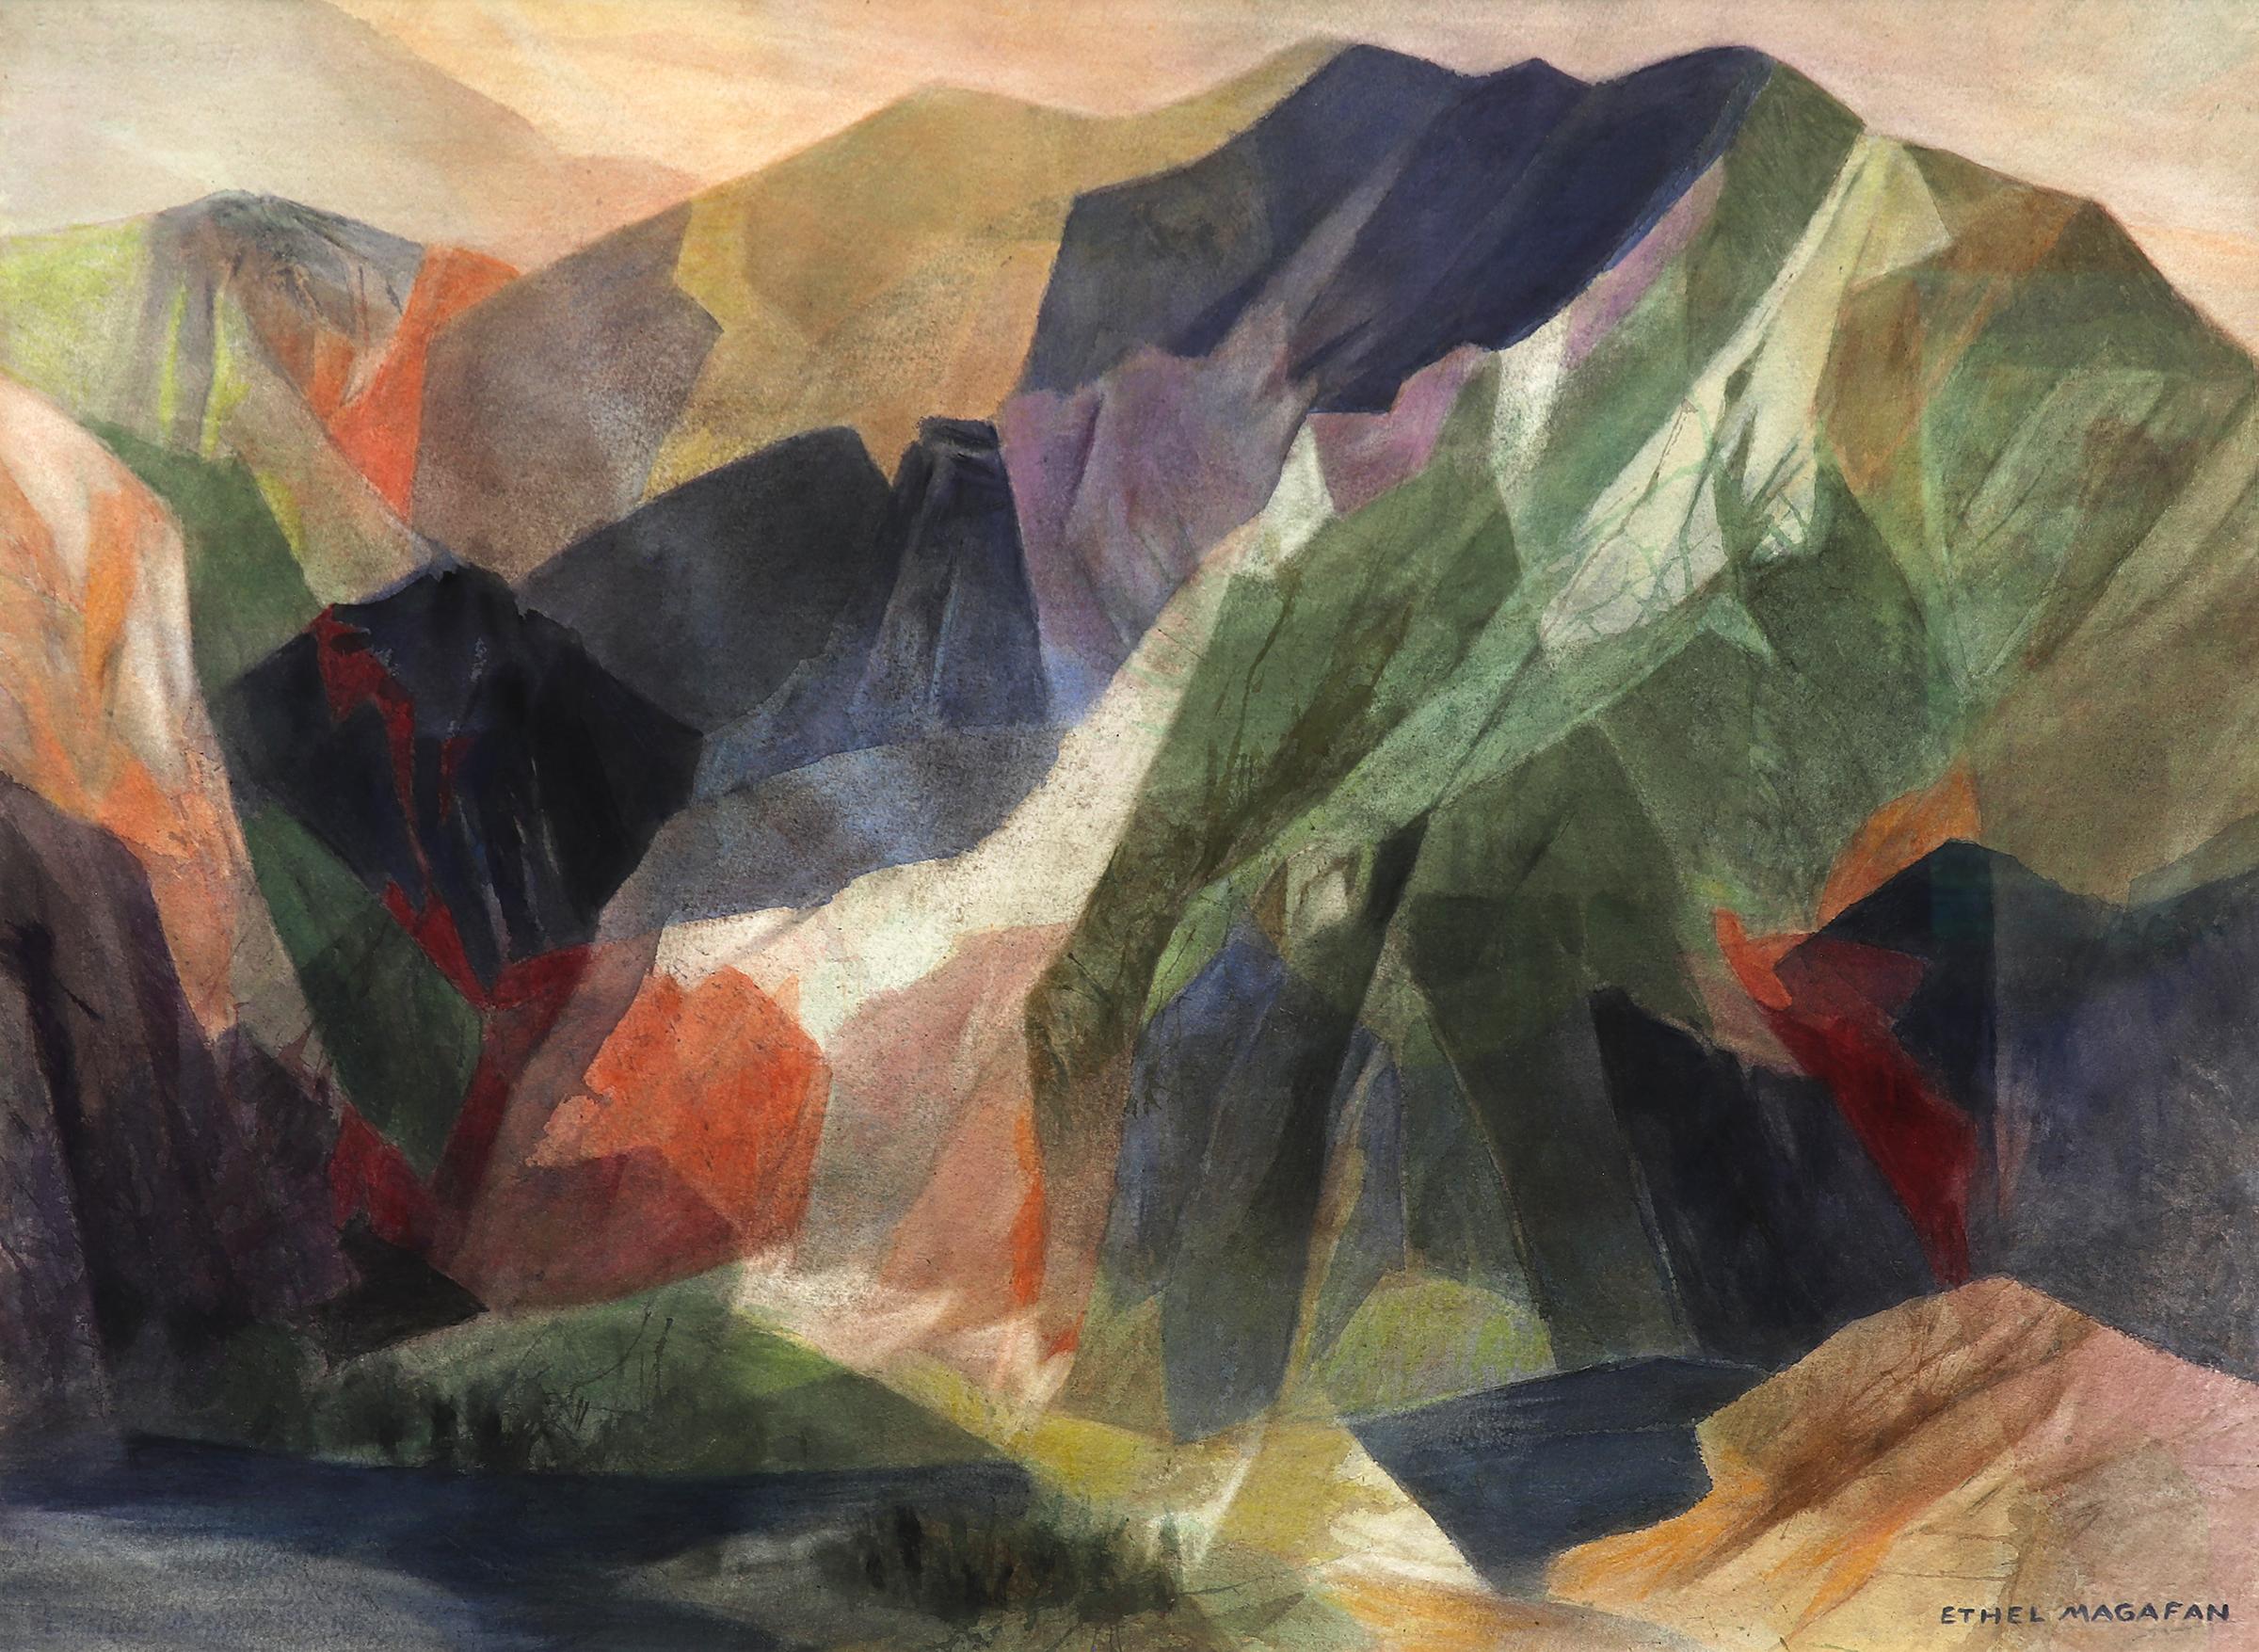 Dawn, Semi-Abstract Mountain Landscape, Multi-colored Watercolor Painting - Art by Ethel Magafan